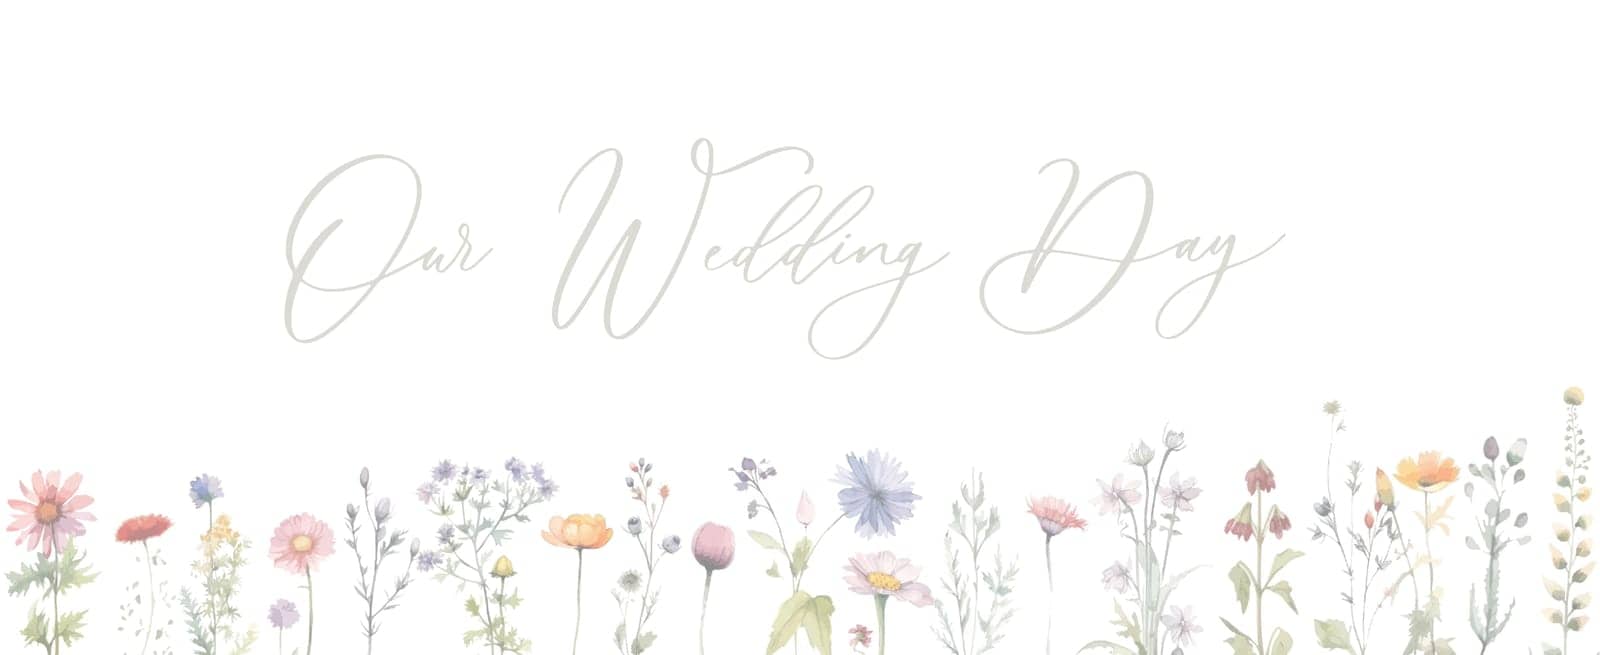 Wedding Timeline menu on wedding day wild herbs and flowers. Our wedding day calligraphy inscription with watercolor illustration. by ku4erashka